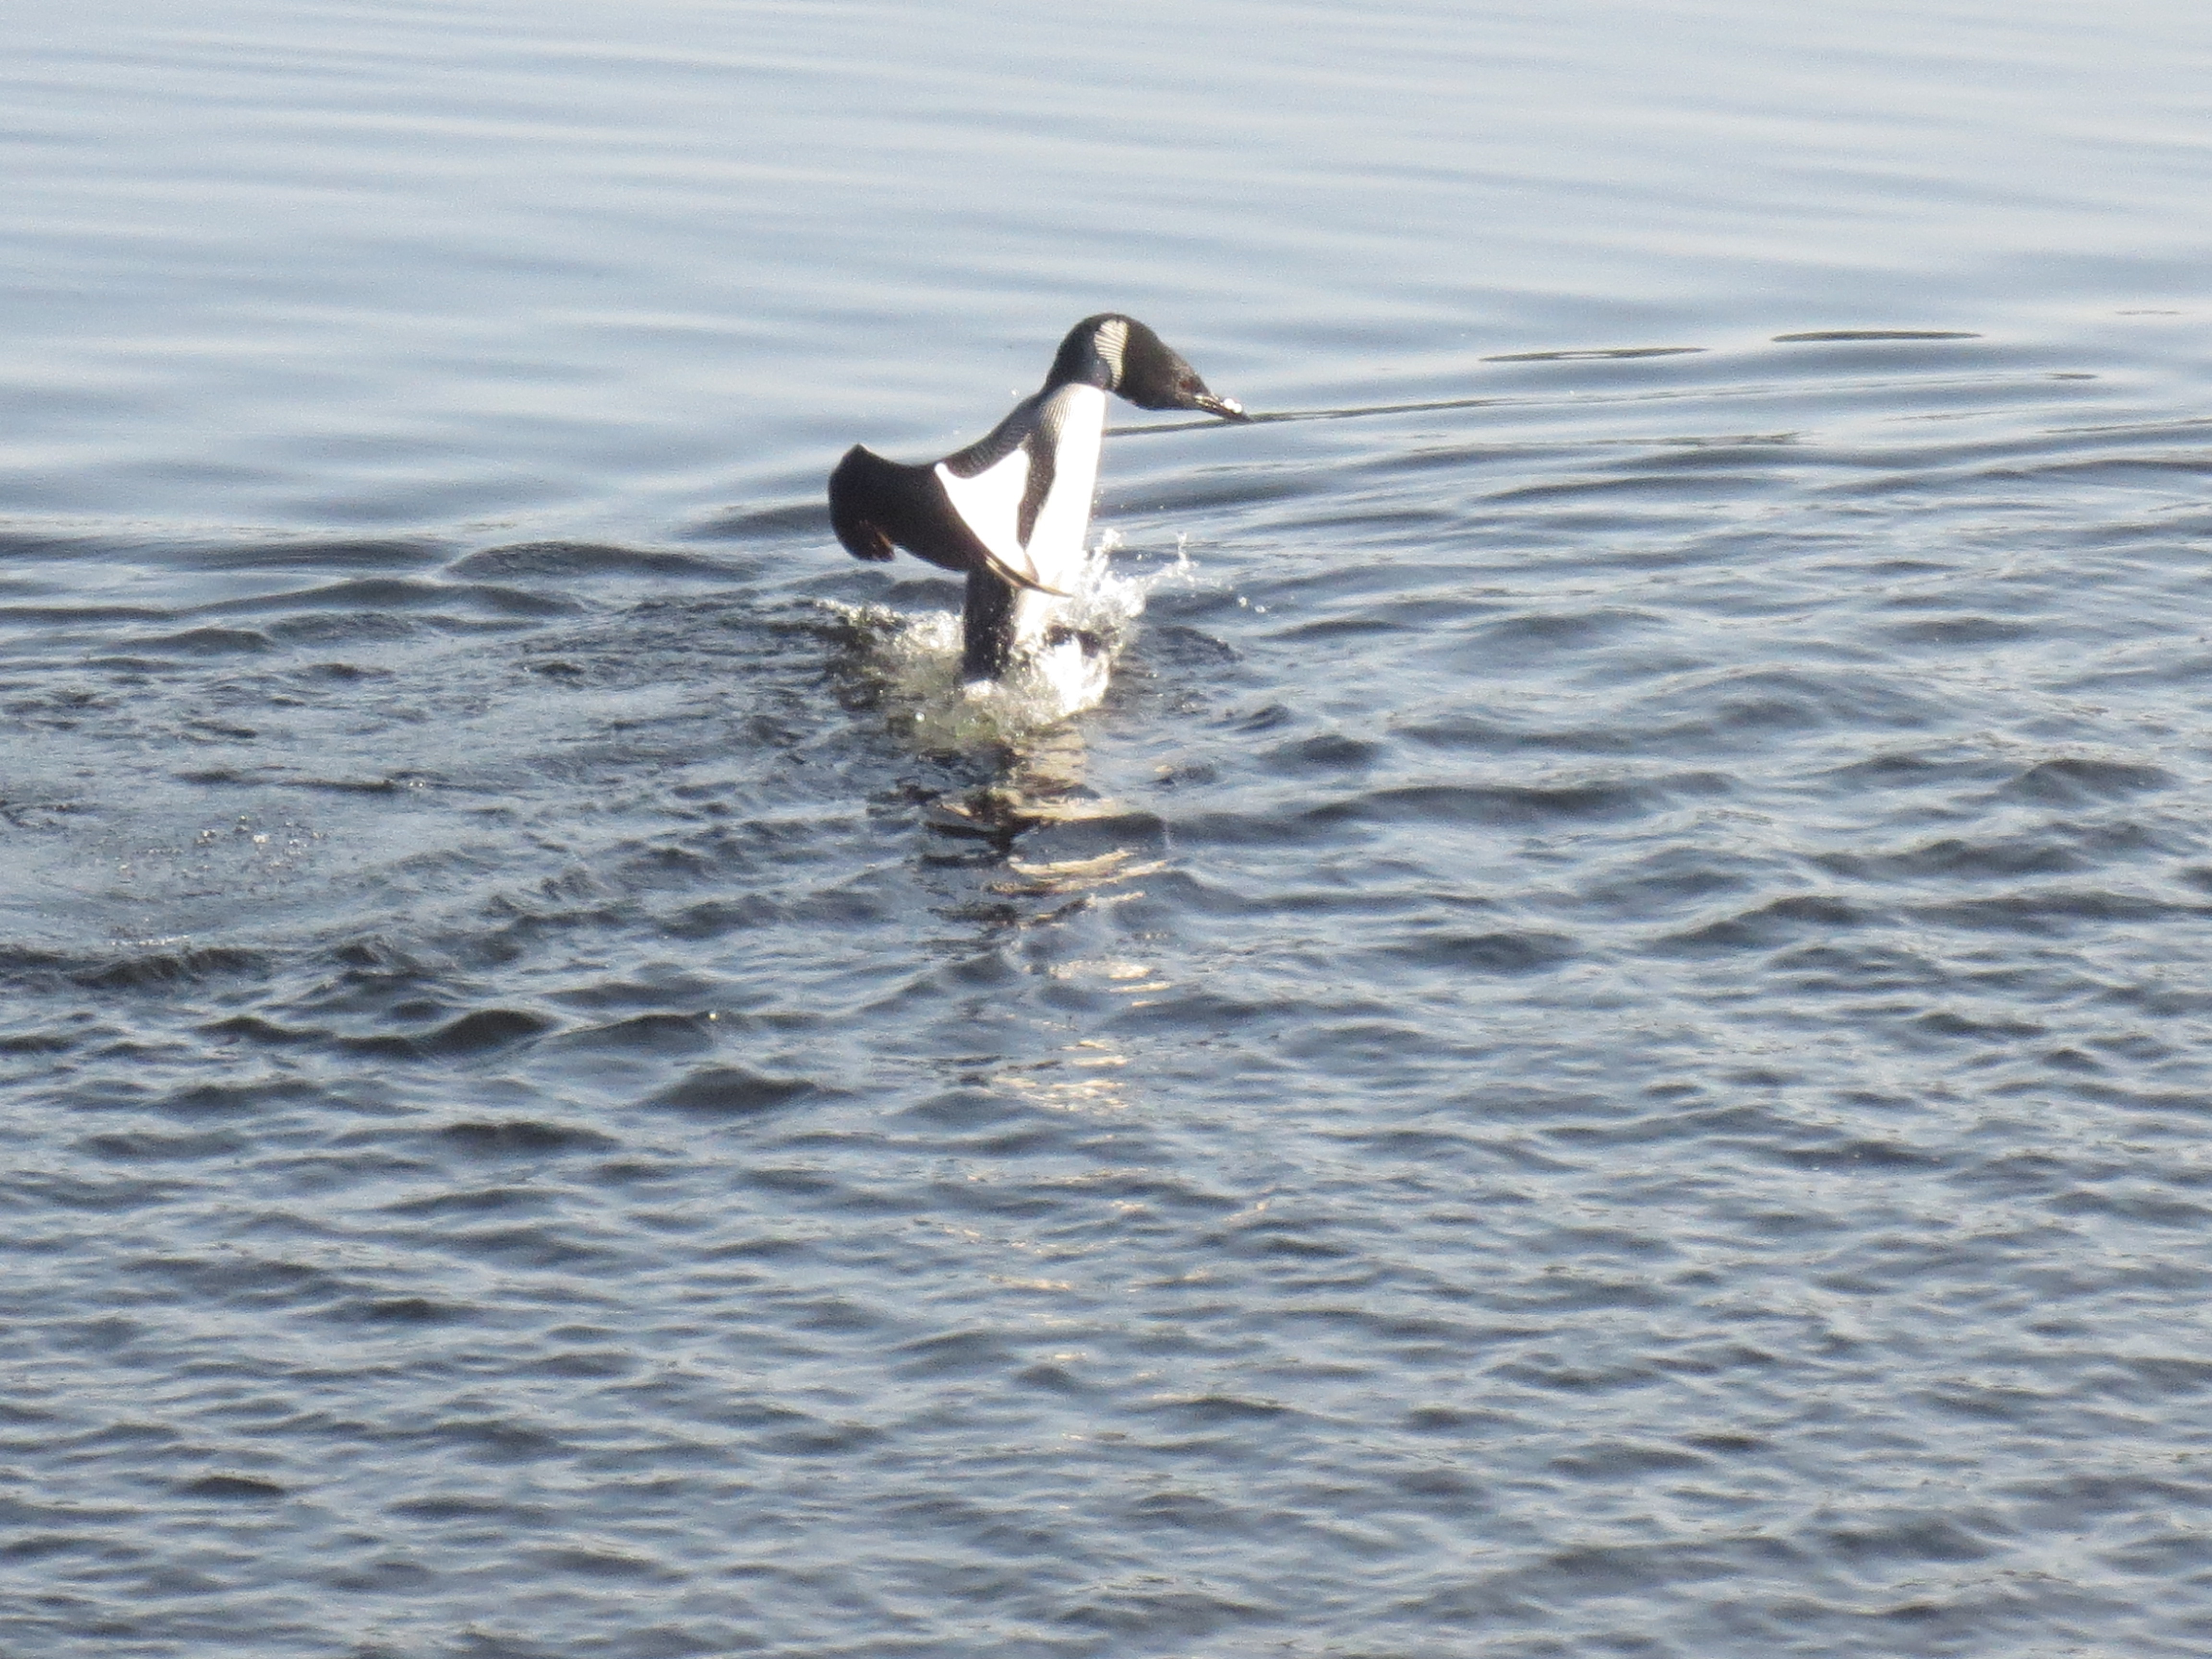 Even more remarkably, the mergansers startled this loon, who expanded his girth to about twice its normal size.  Those ducks took off at about 100 miles per hour.  So, indeed, "Life is camp and camp is life."  